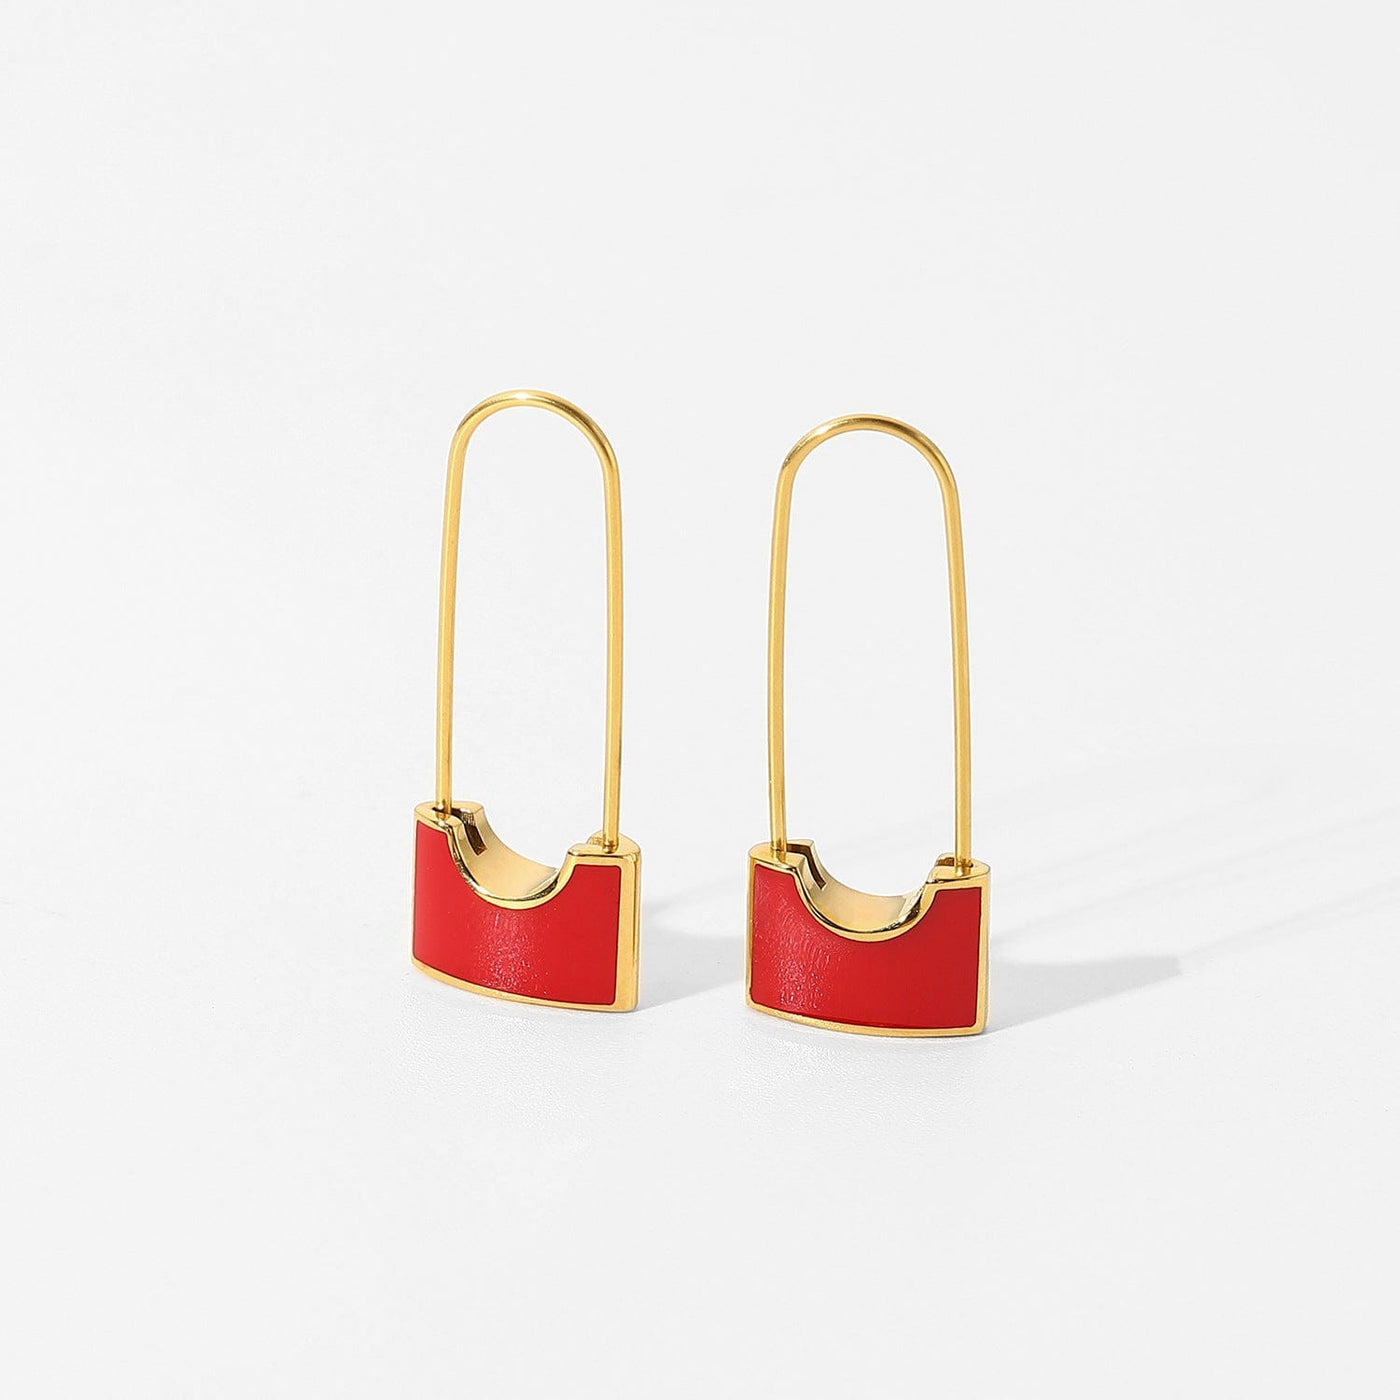 nolo lock me love me stainless steel 18k gold plated candy colored red safety pin lock designed colorful hoop earrings 